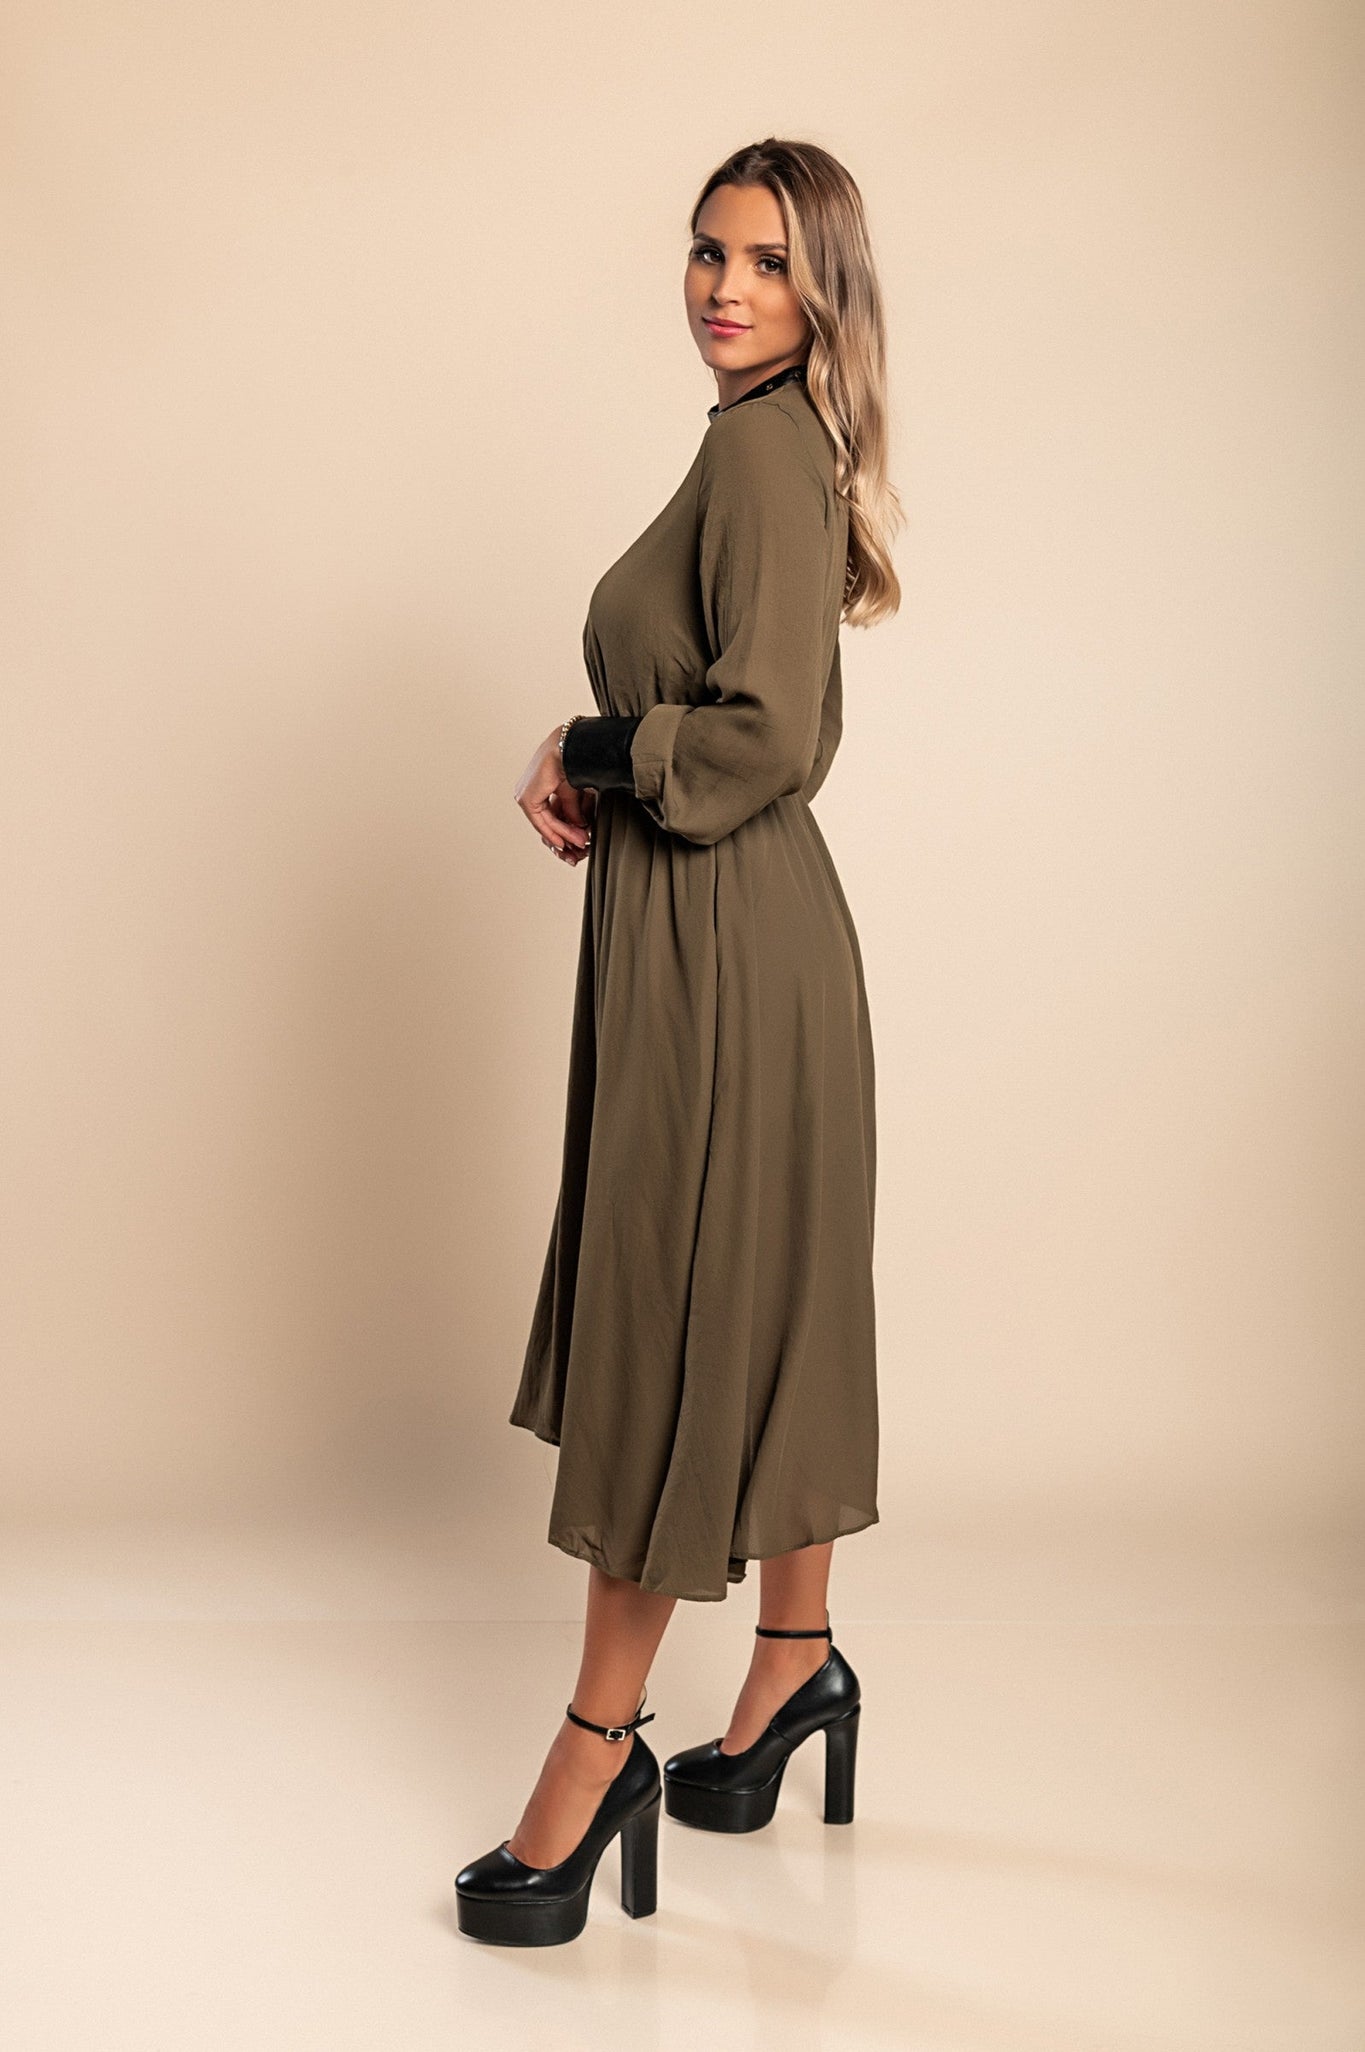 Elegant midi dress with Plana artificial leather inserts, olive